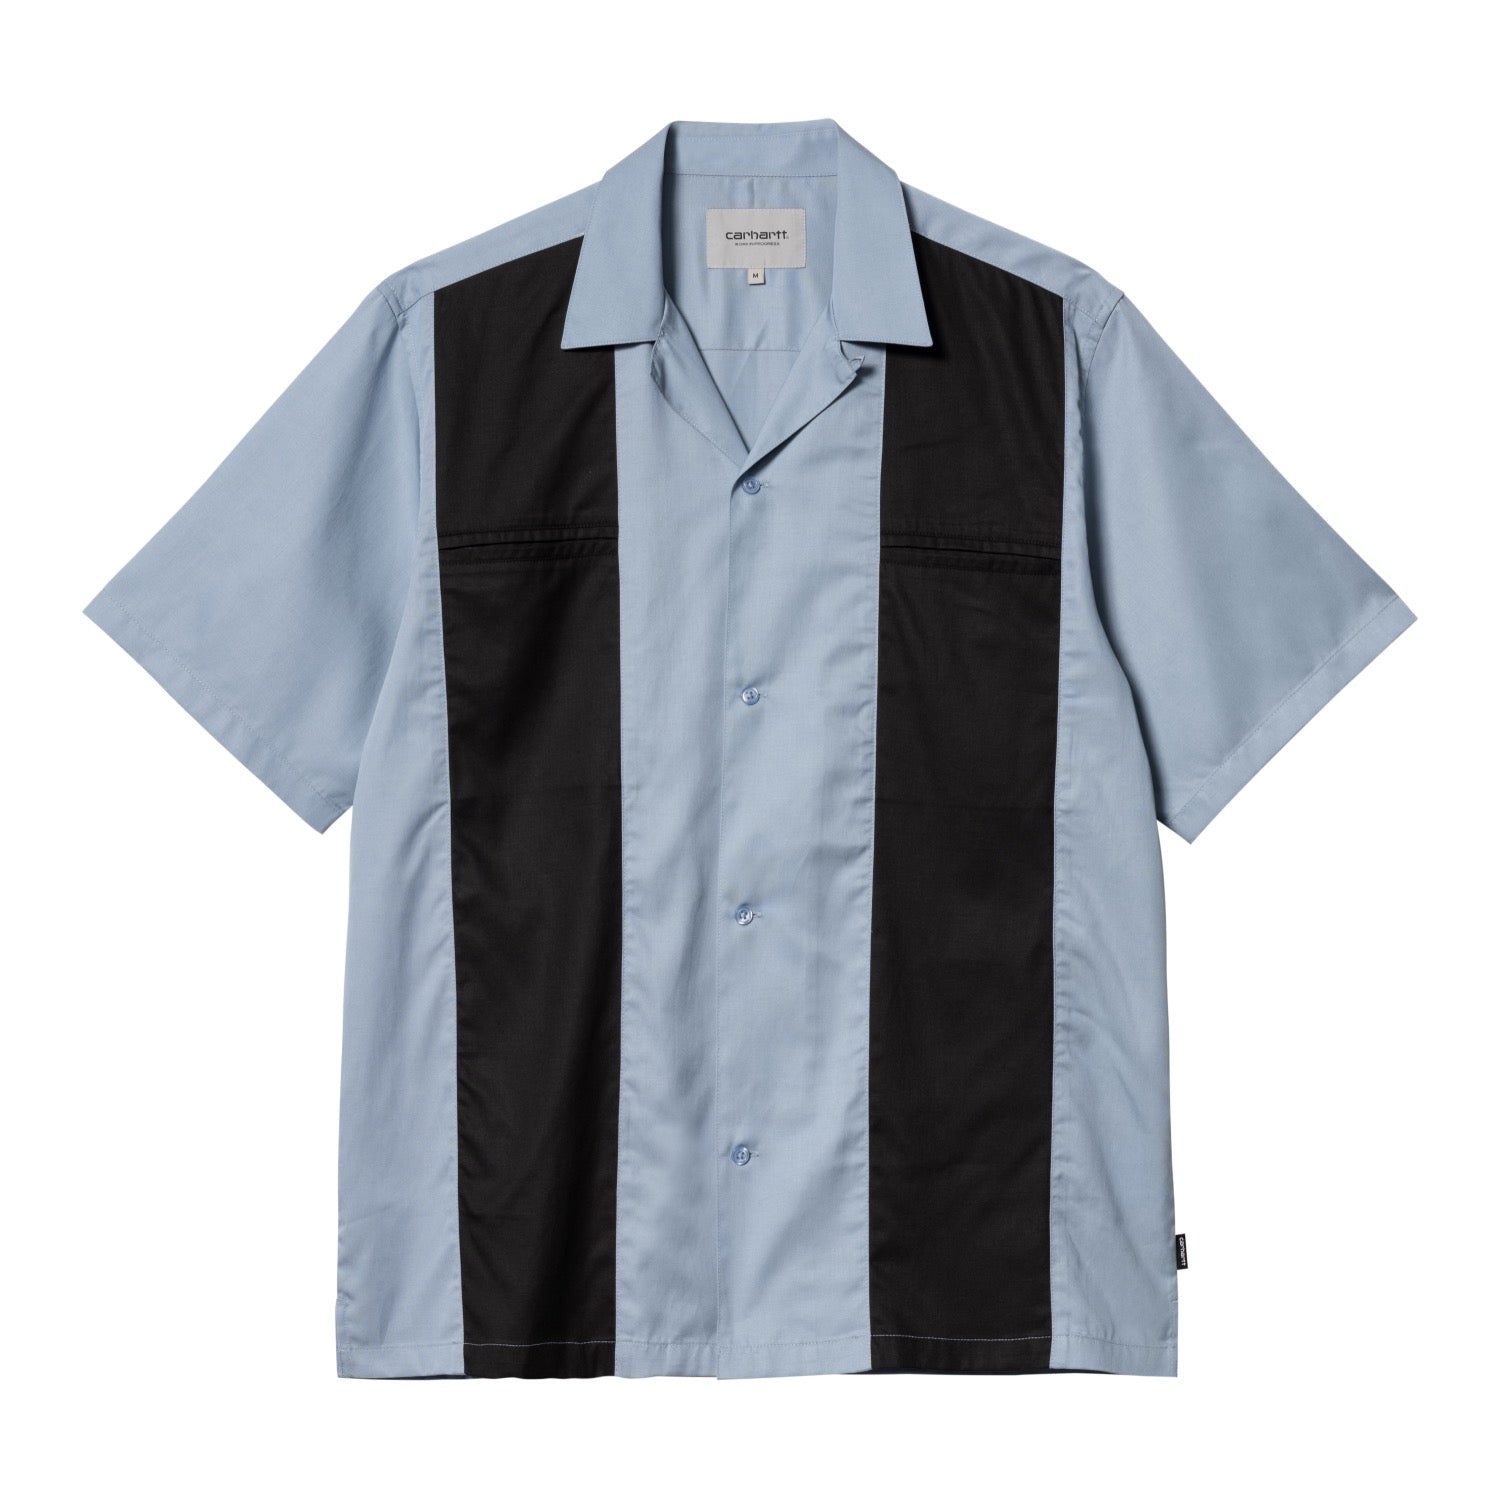 S/S DURANGO SHIRT - Frosted Blue / Black